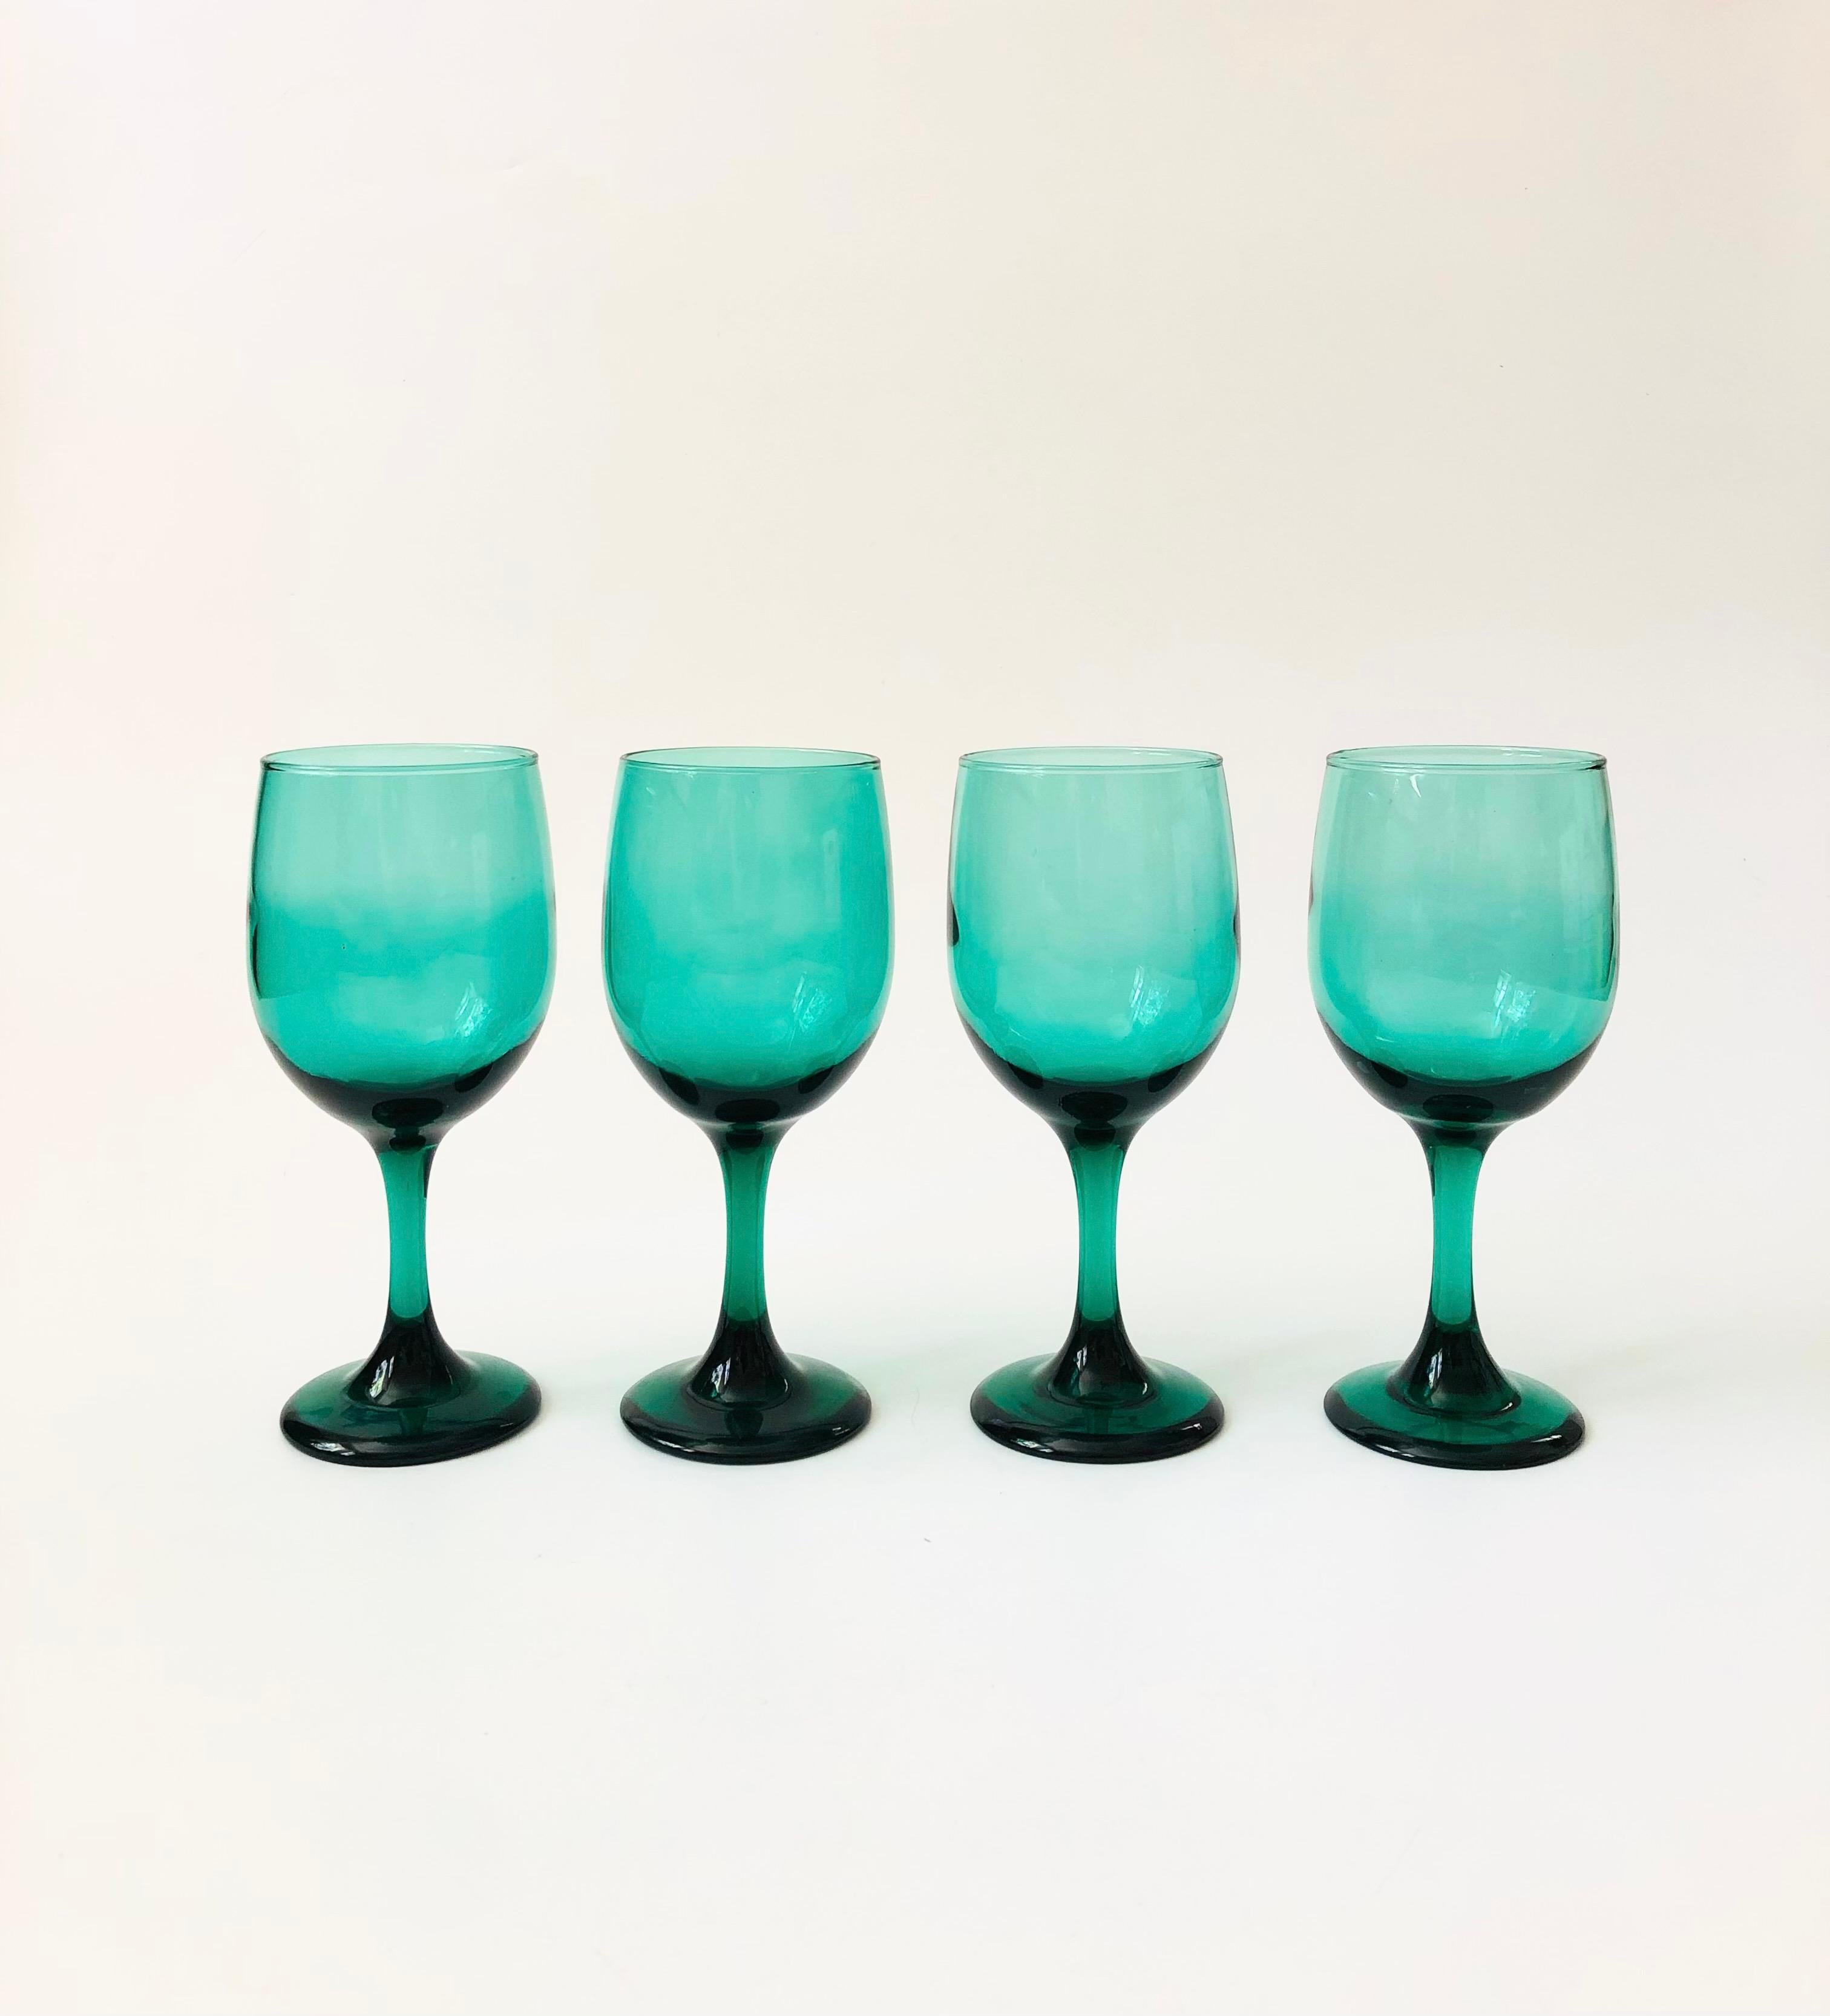 A set of 4 vintage wine glasses. Beautiful moody emerald green color in an elegant tapered shape. 